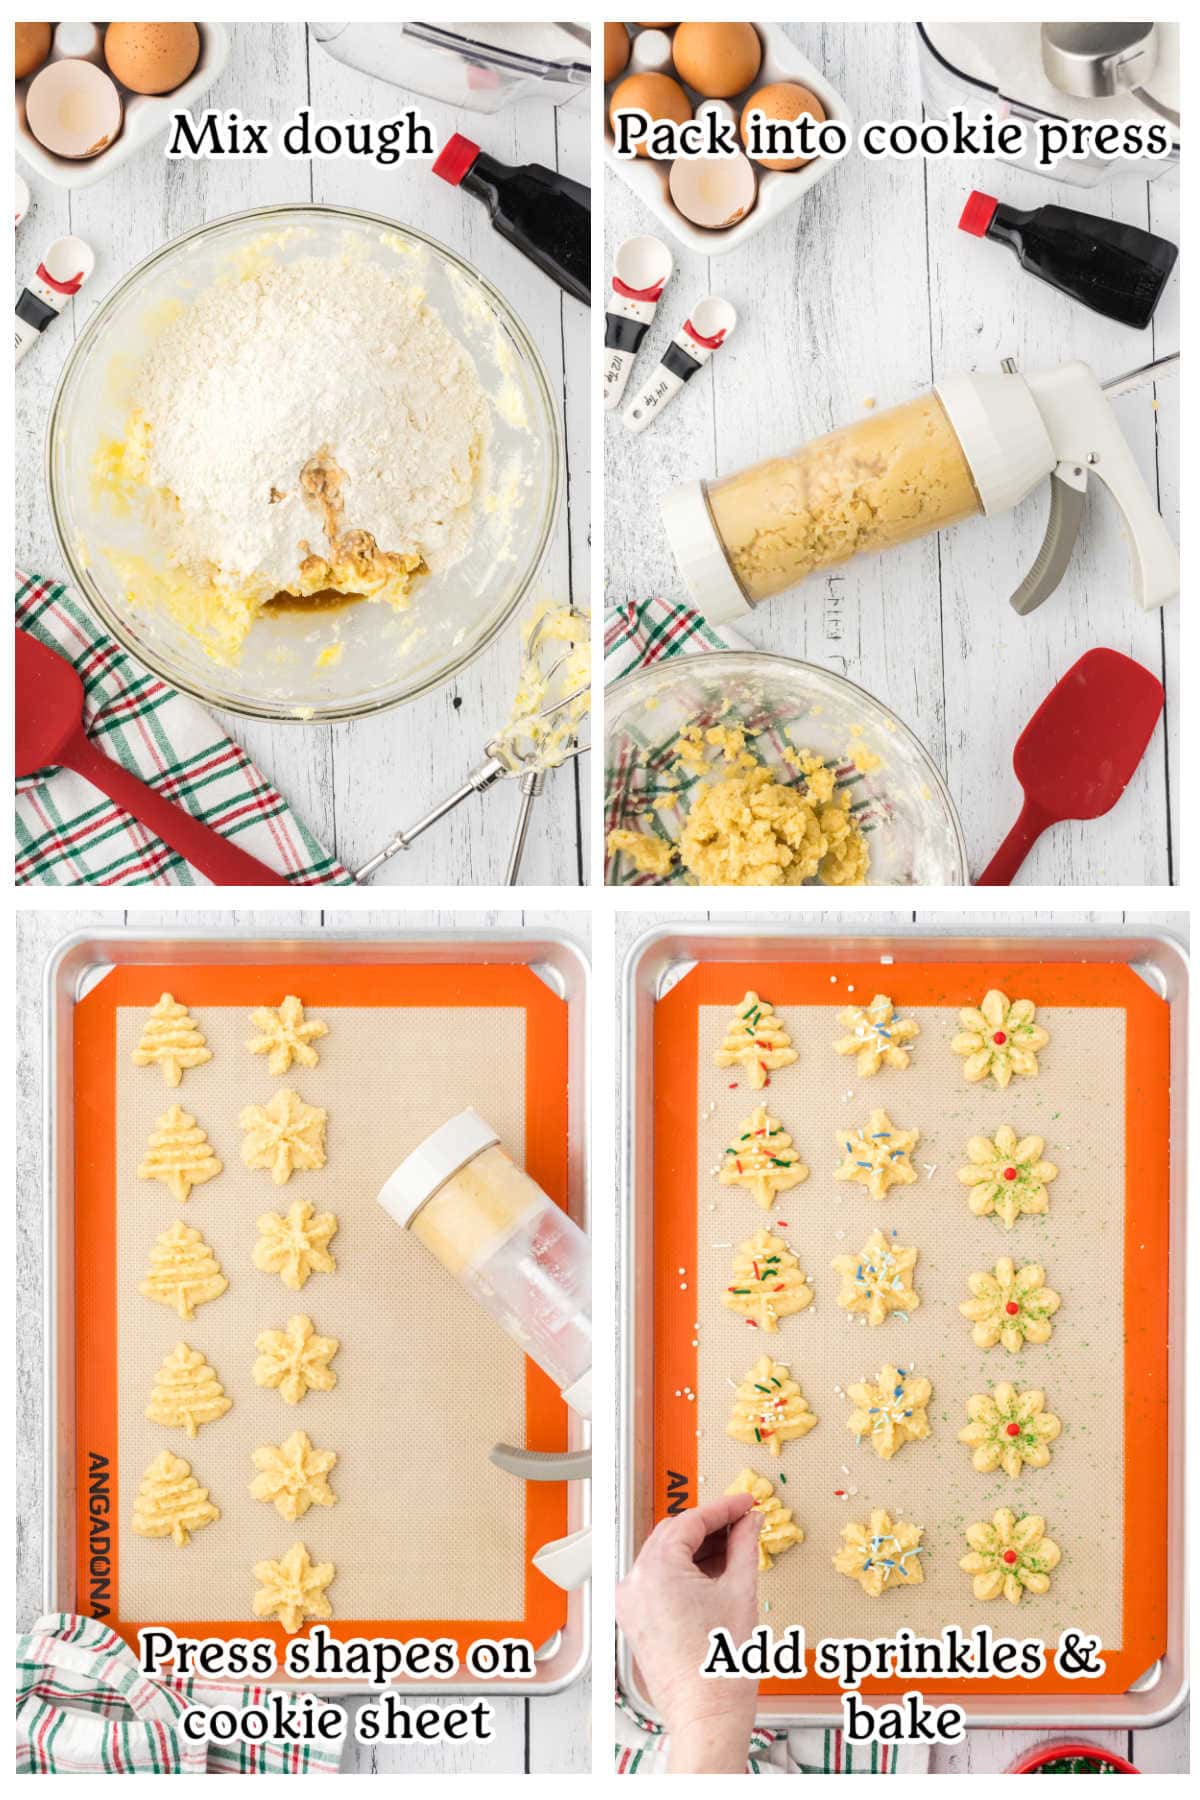 Four overhead images with text overlay depicting the main recipe steps.